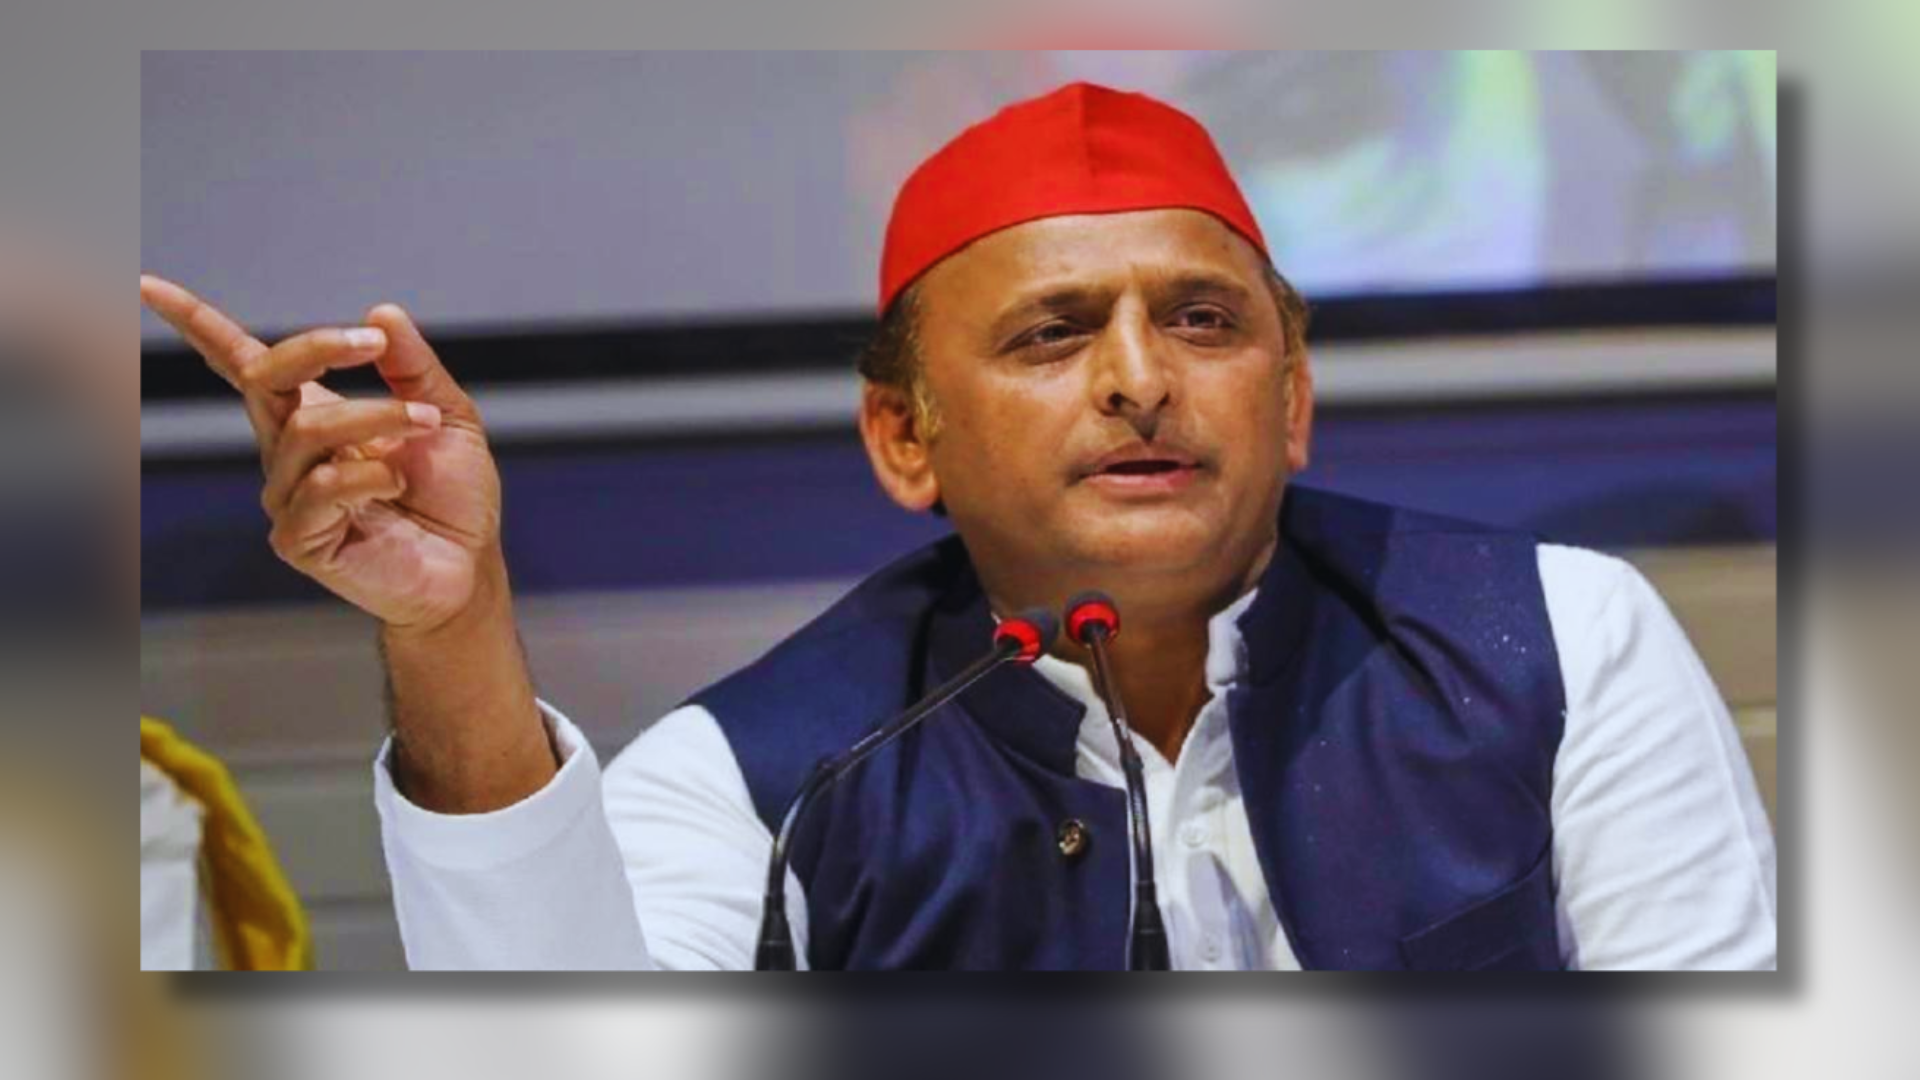 Akhilesh Yadav Voices His Election Perspective Amid Fourth Phase Of Polling